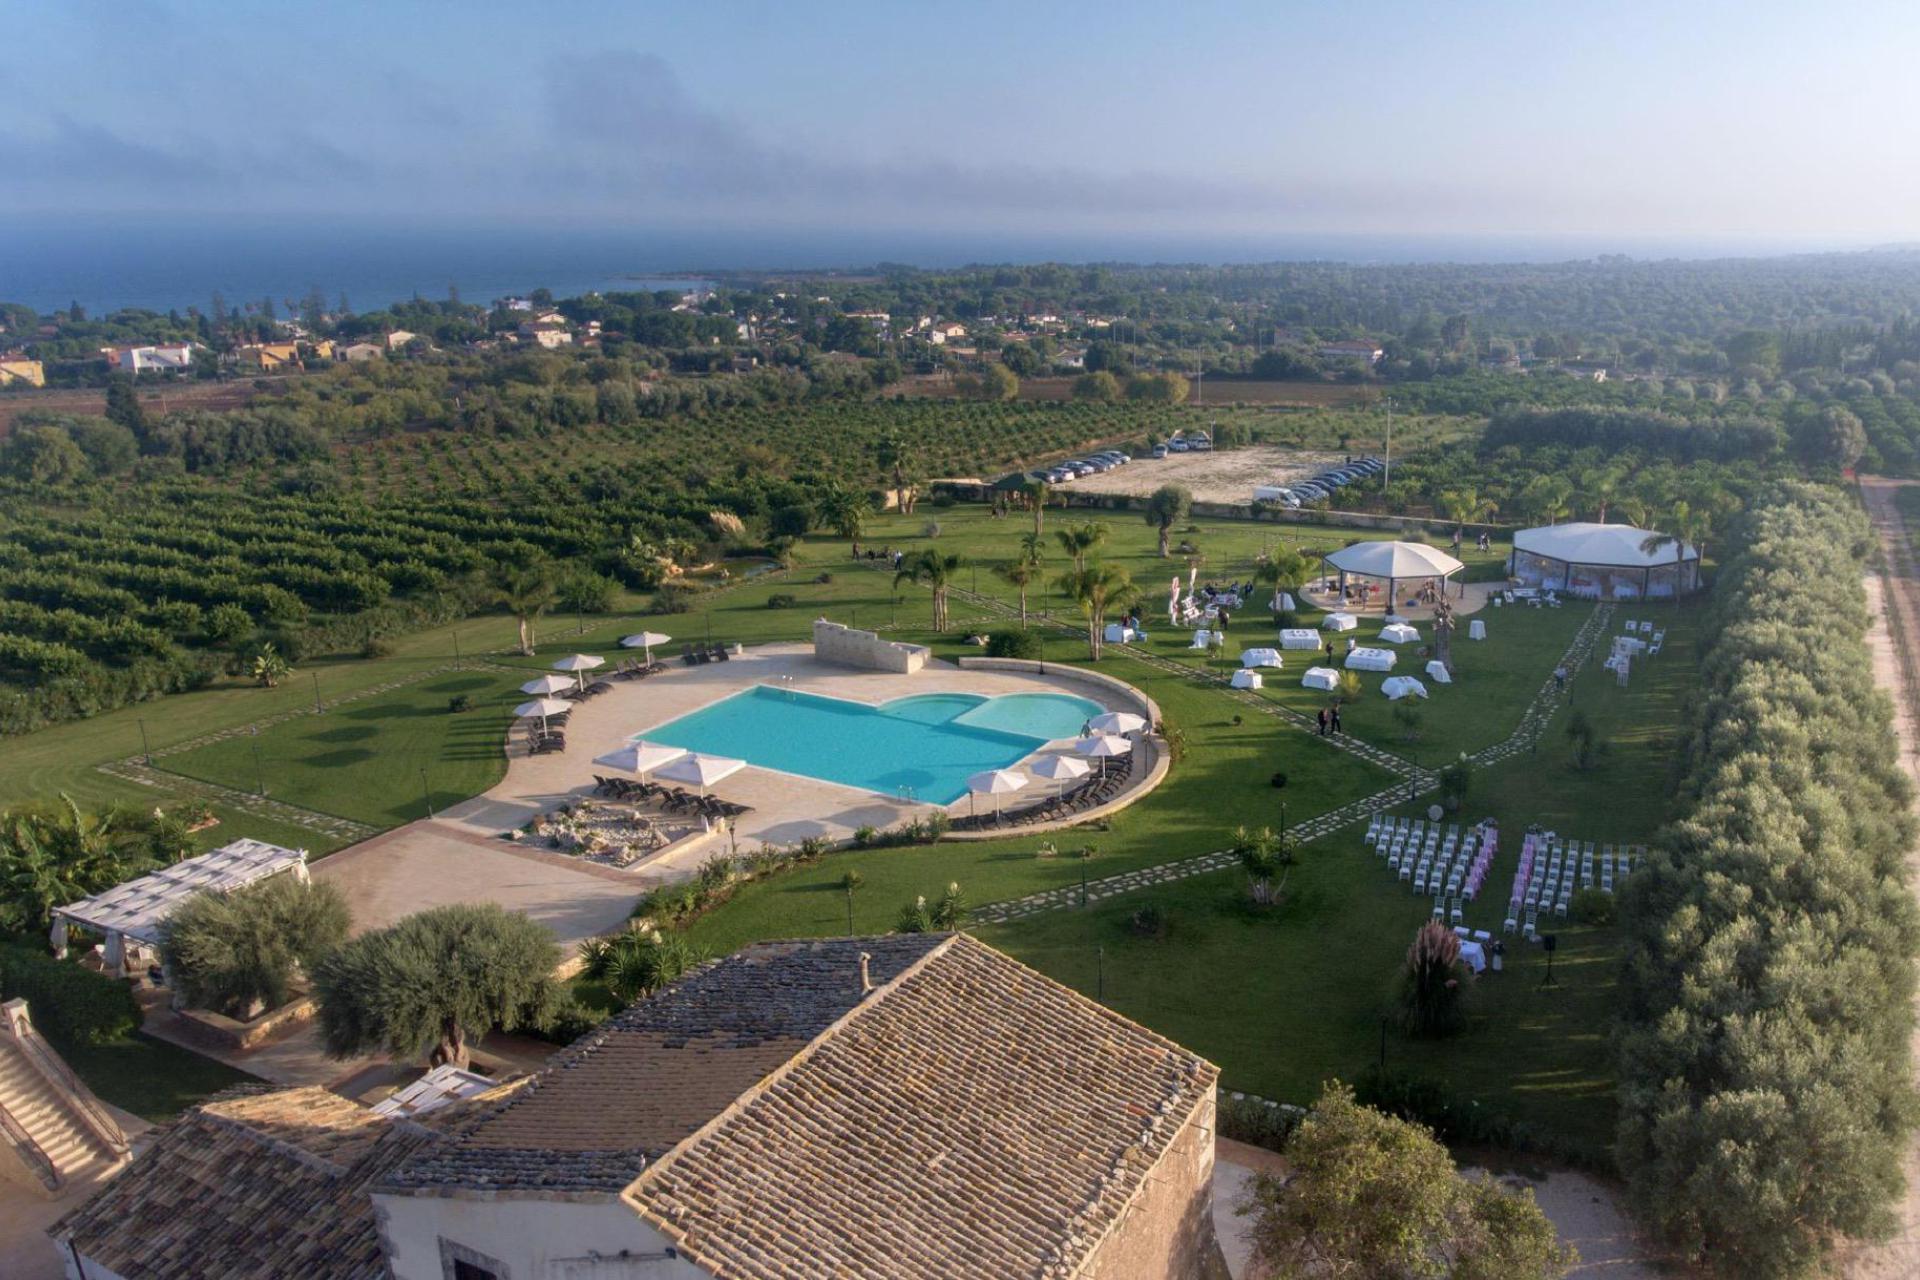 Agriturismo with luxurious pool near the sea